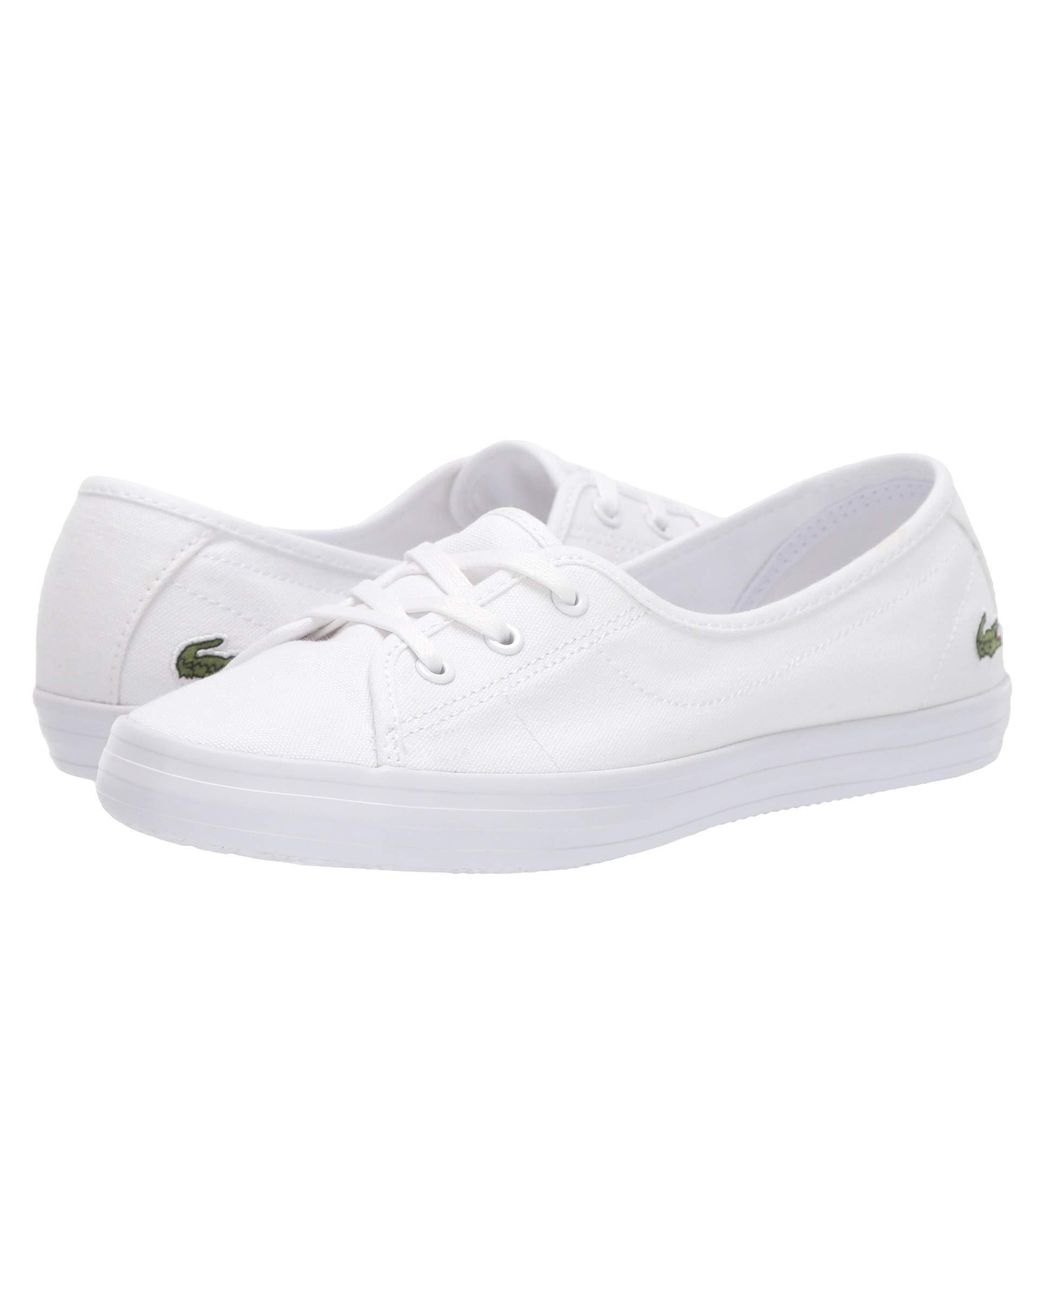 Sneakers, Ziane Chunky - Baskets Basses White